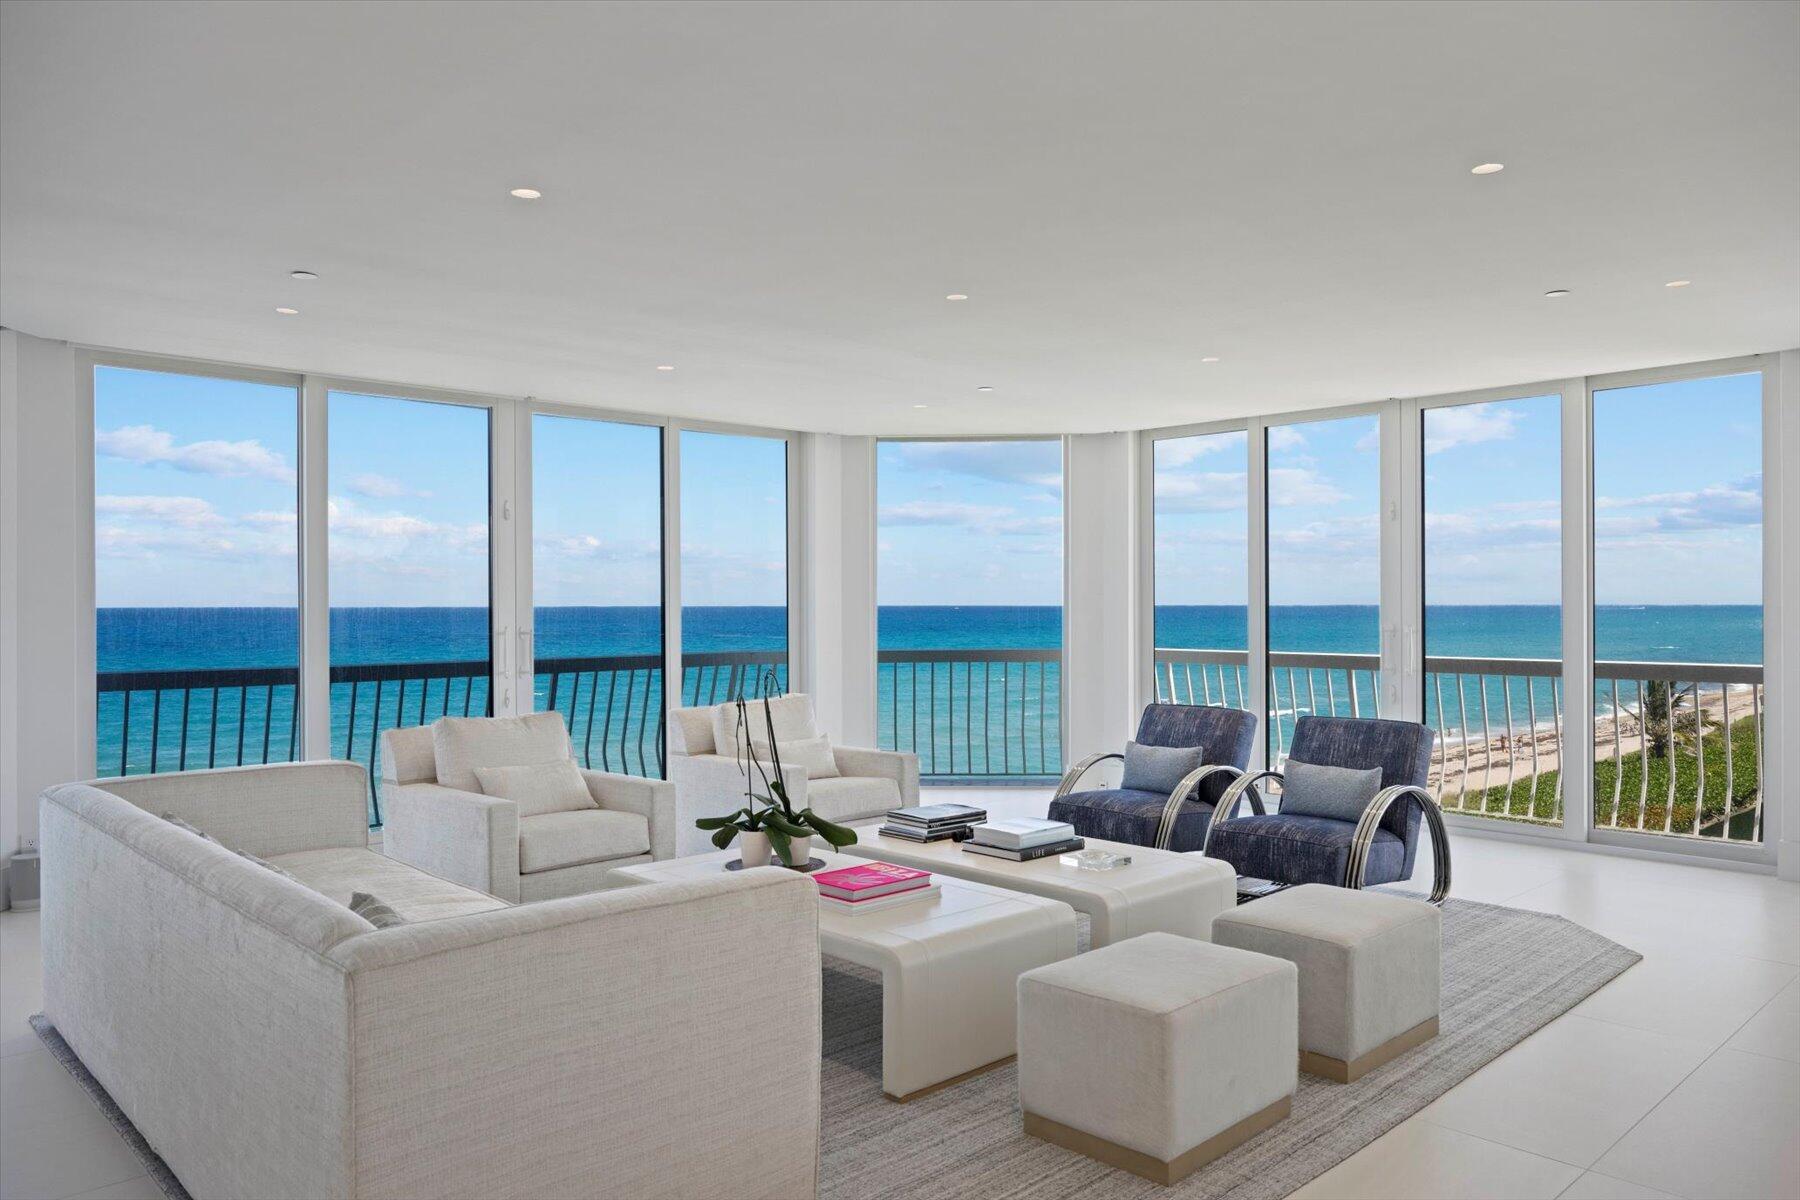 Stunningly renovated to perfection at Sloan's Curve in a contemporary style, this 3/3 has the most far reaching panoramic ocean and beach views and a desirable southeast exposure. Quality details and beautifully furnished on a high floor with an oversized terrace, you will be mesmerized from morning till night and feel as if you're on the most luxurious yacht!  The openness of the floorplan in the reimagined custom renovation will check every box for an annual or seasonal rental, including an oversized terrace. Includes a renovated poolside cabana and 2 garage spaces. $40,000/month annually.